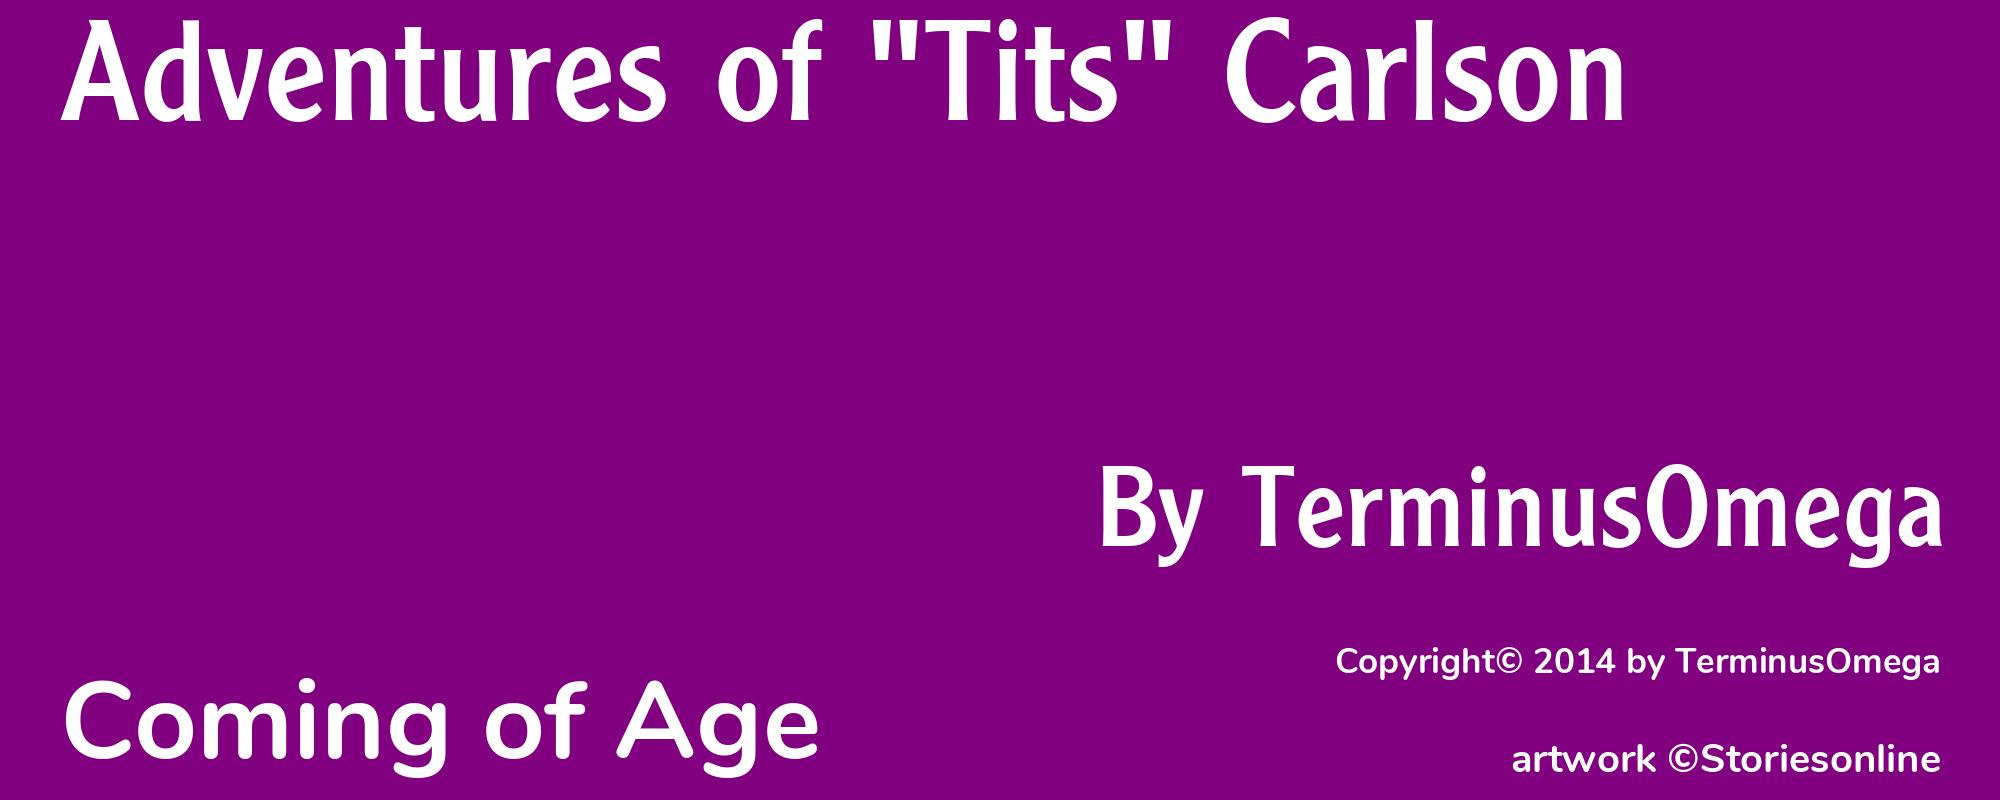 Adventures of "Tits" Carlson - Cover